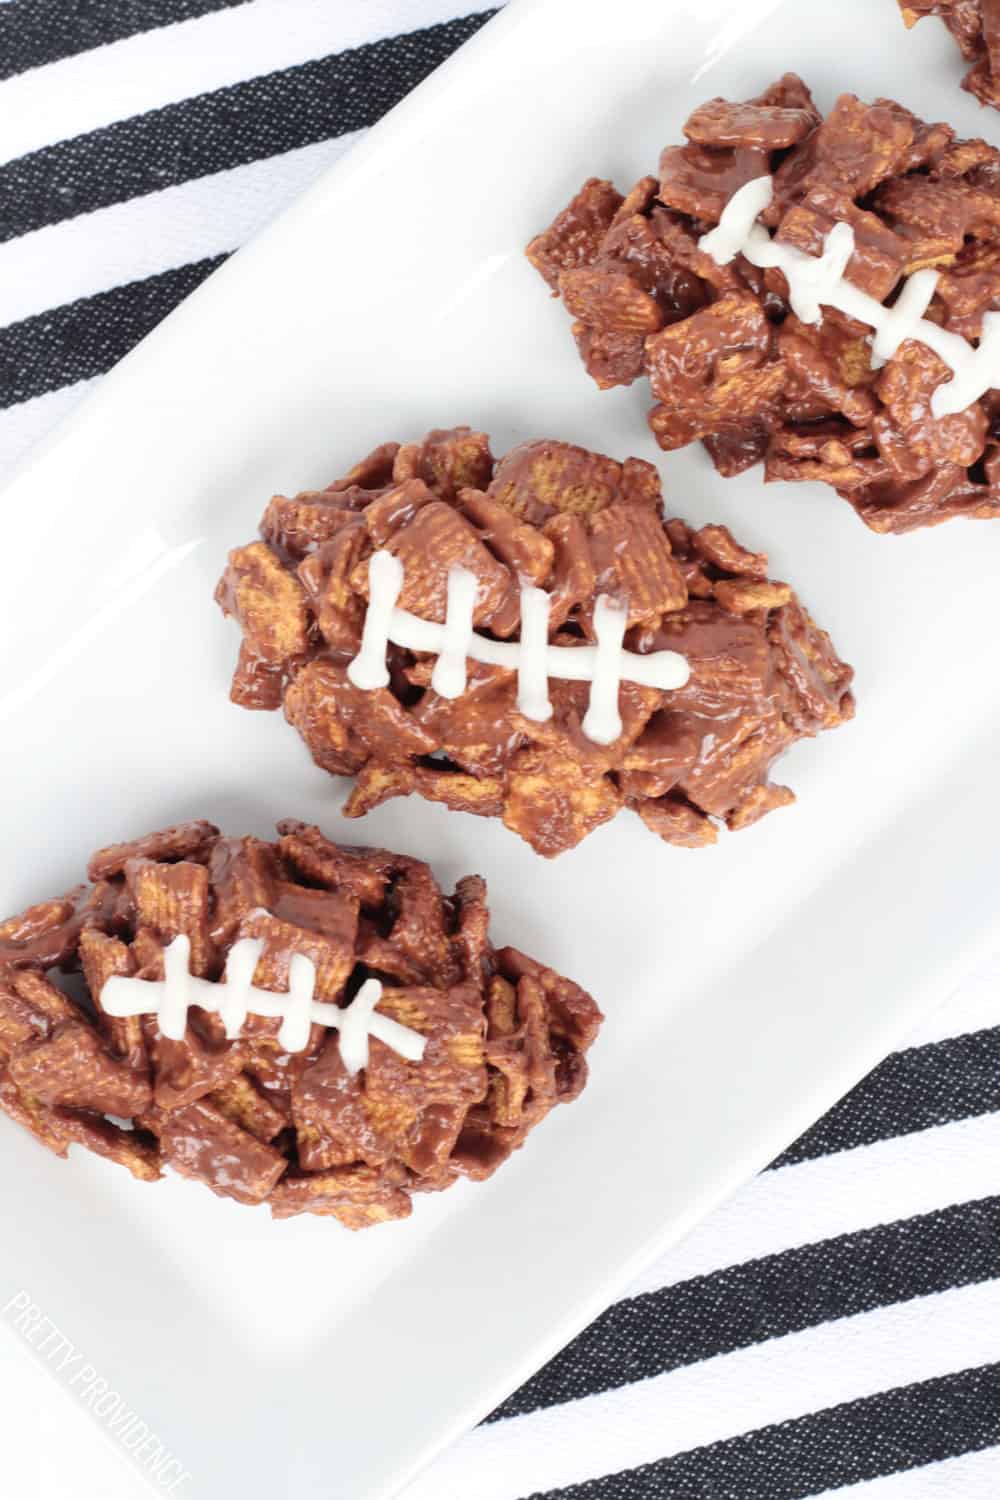 Three football-shaped desserts on a white plate, s'mores bars made with golden grahams cereal, chocolate and icing.